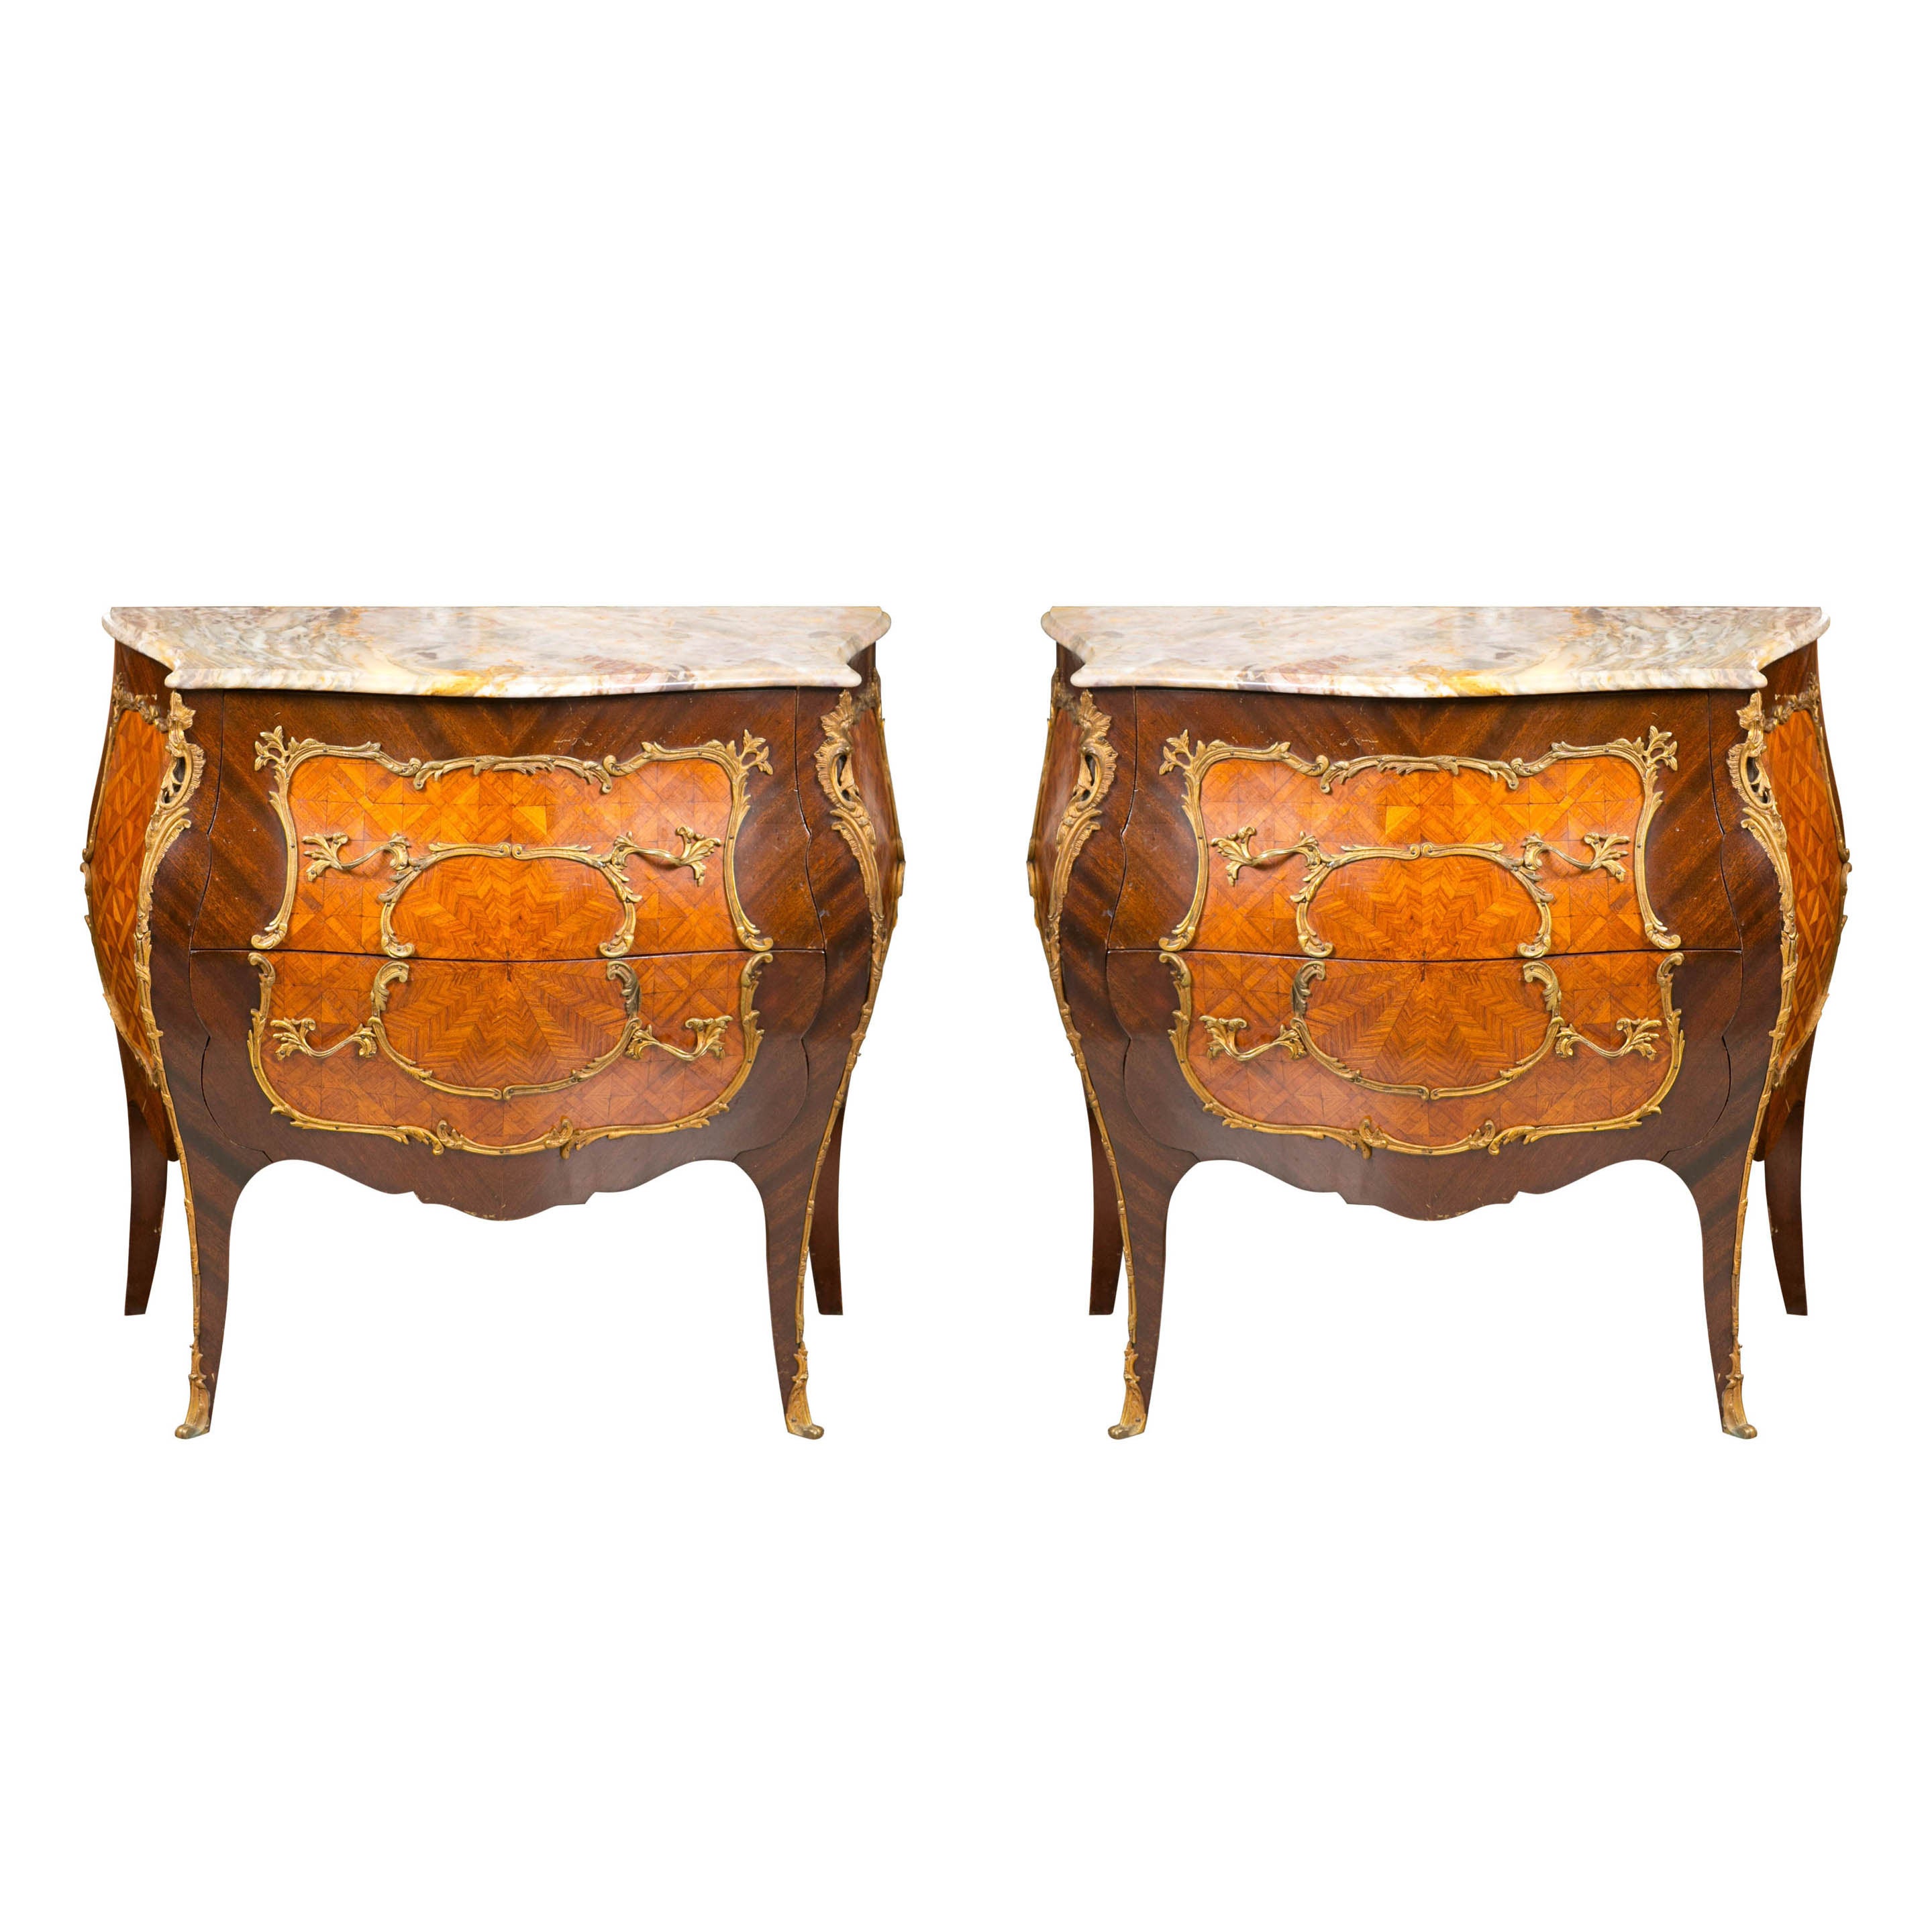 A Pair of French Bombe Marble Top Commodes / Nightstands